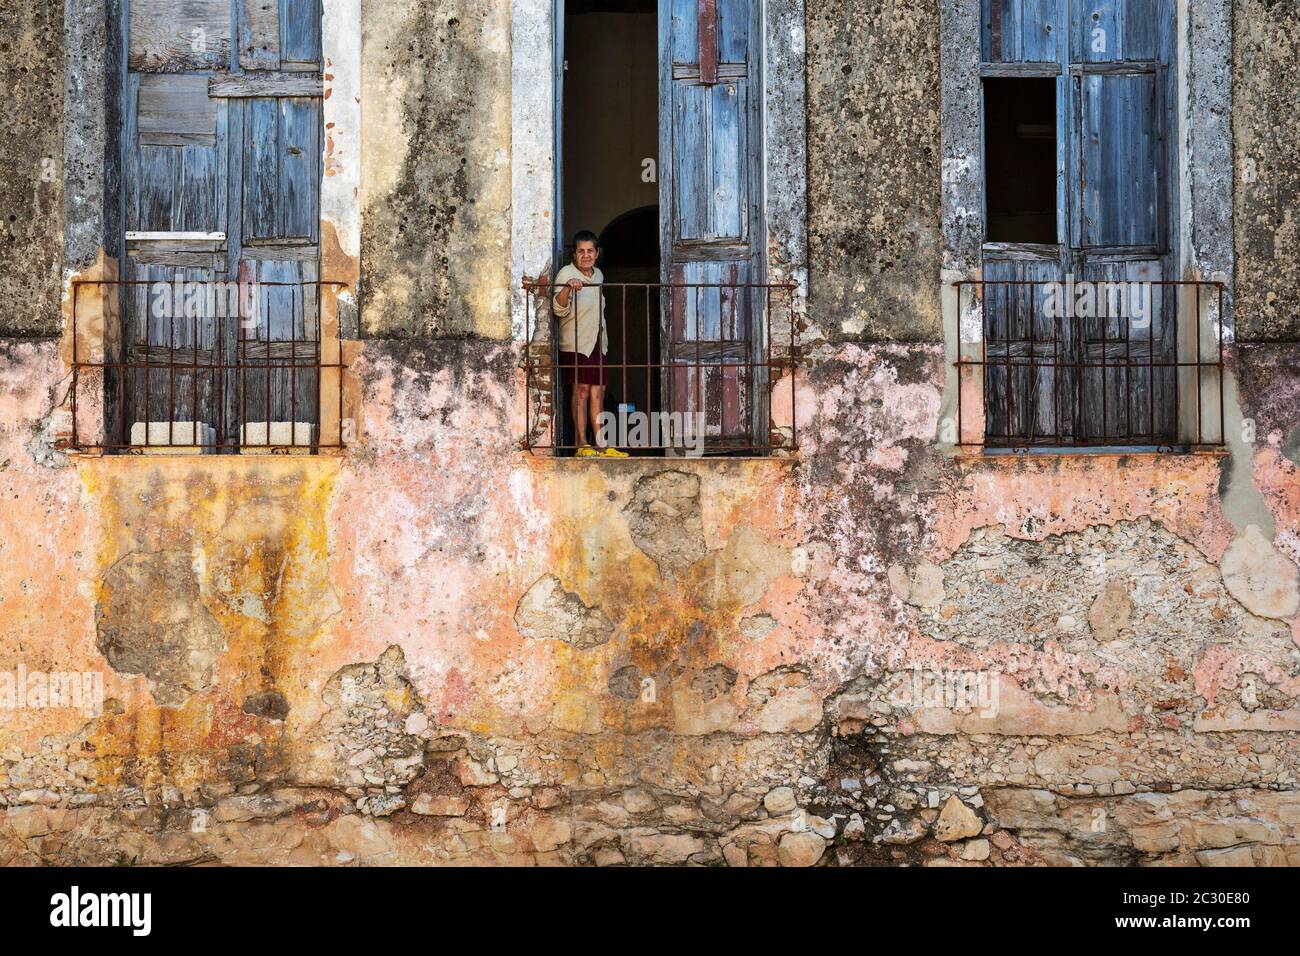 Colours, shapes and textures at the decayed facade of crumbling plaster and weathered wooden doors and windows, Gibara, Cuba Stock Photo